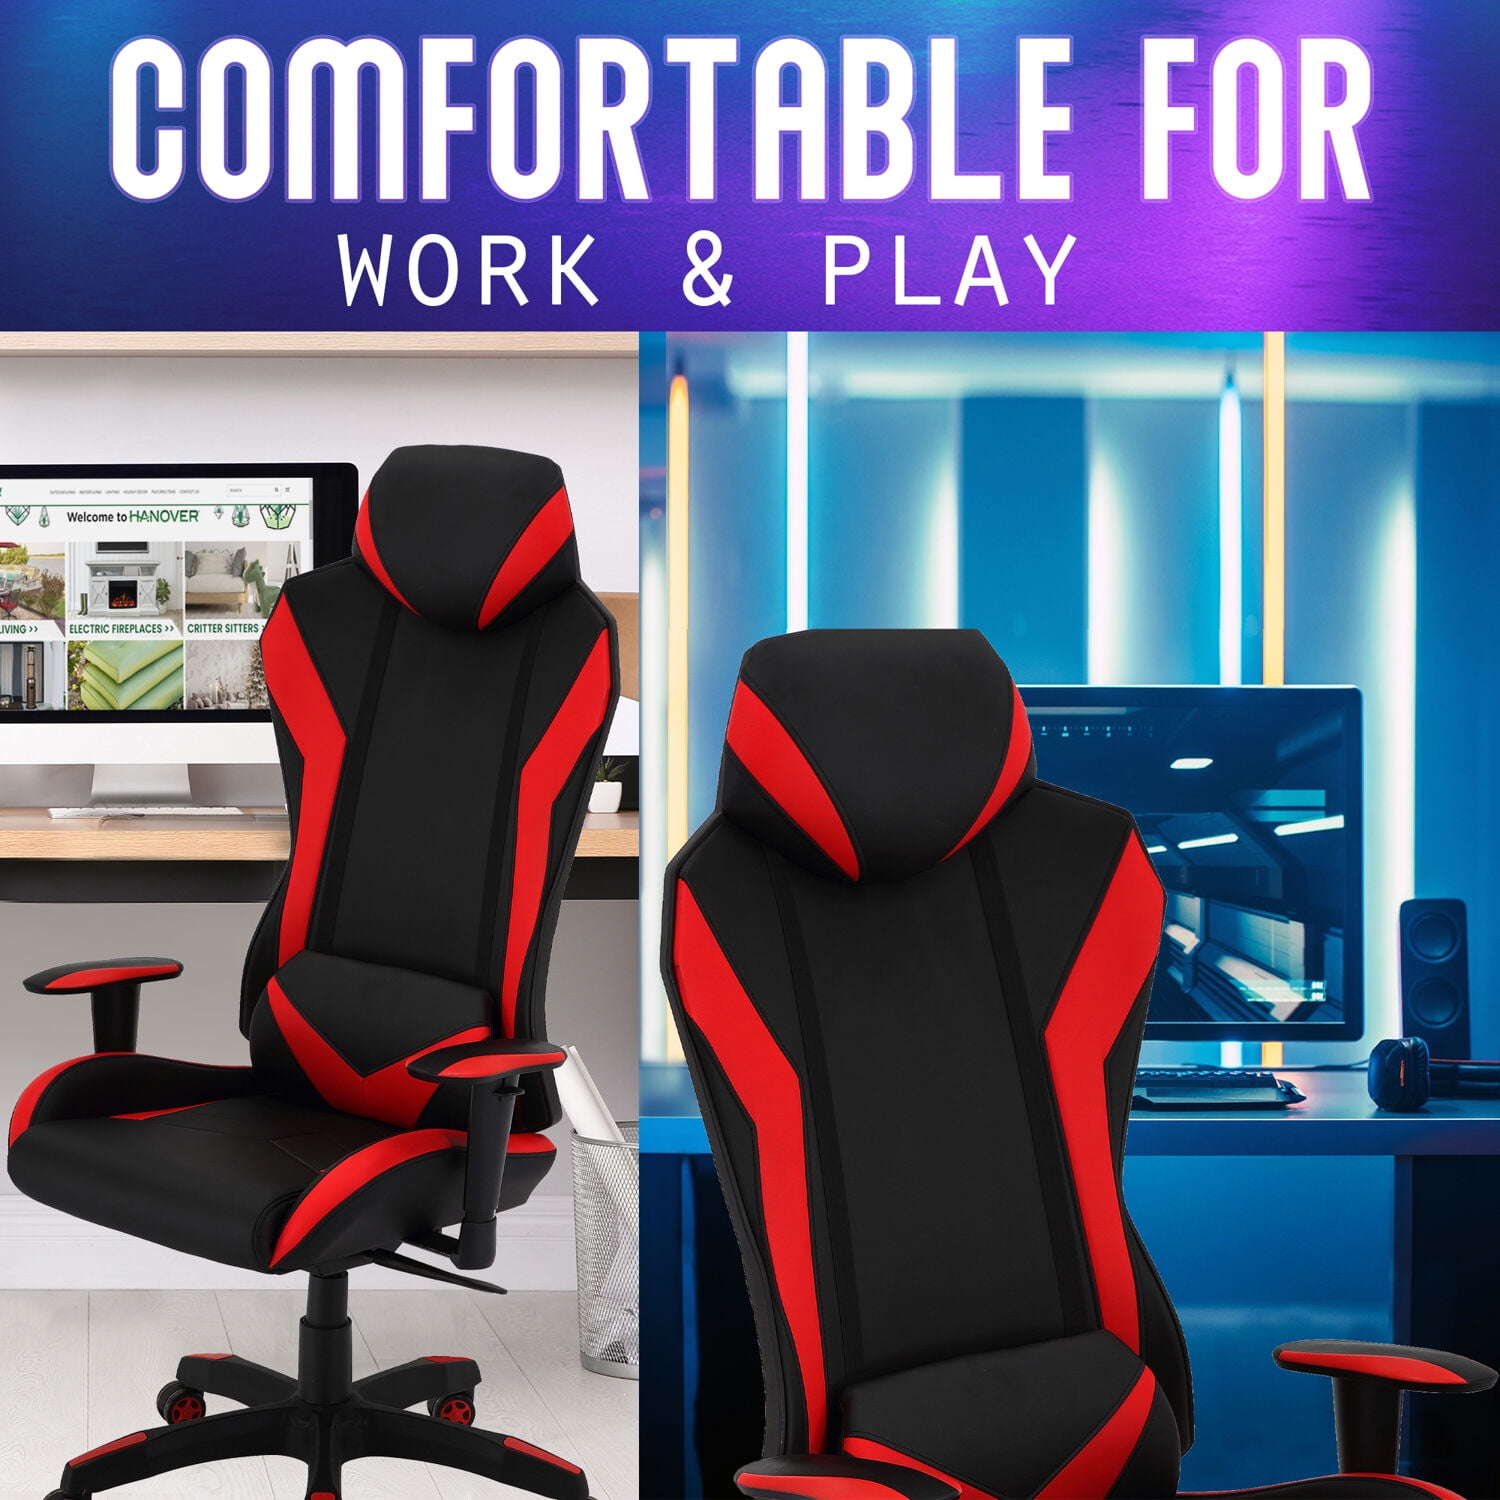 Commando Ergonomic High-Back Gaming Chair in and Red with Adjustable Gas Lift Seating and Lumbar Support Walmart.com